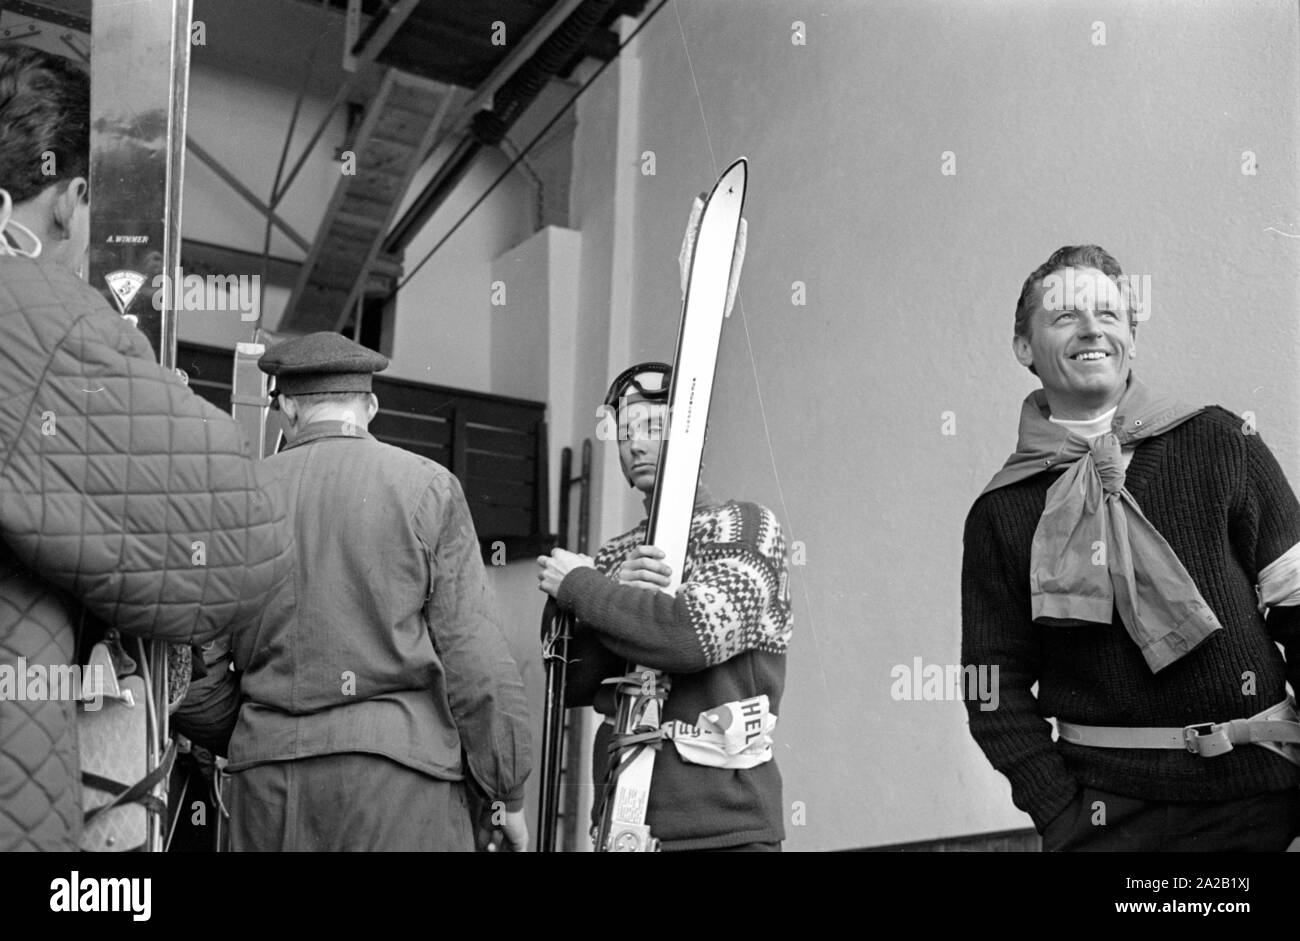 Photo of ski racer Toni Sailer with his skis at the cable car station, which goes up to the Hahnenkamm. He took part in the ski race held there in January 1962. The Hahnenkamm race has been held on the Hahnenkamm in Kitzbuehel since 1931. Stock Photo